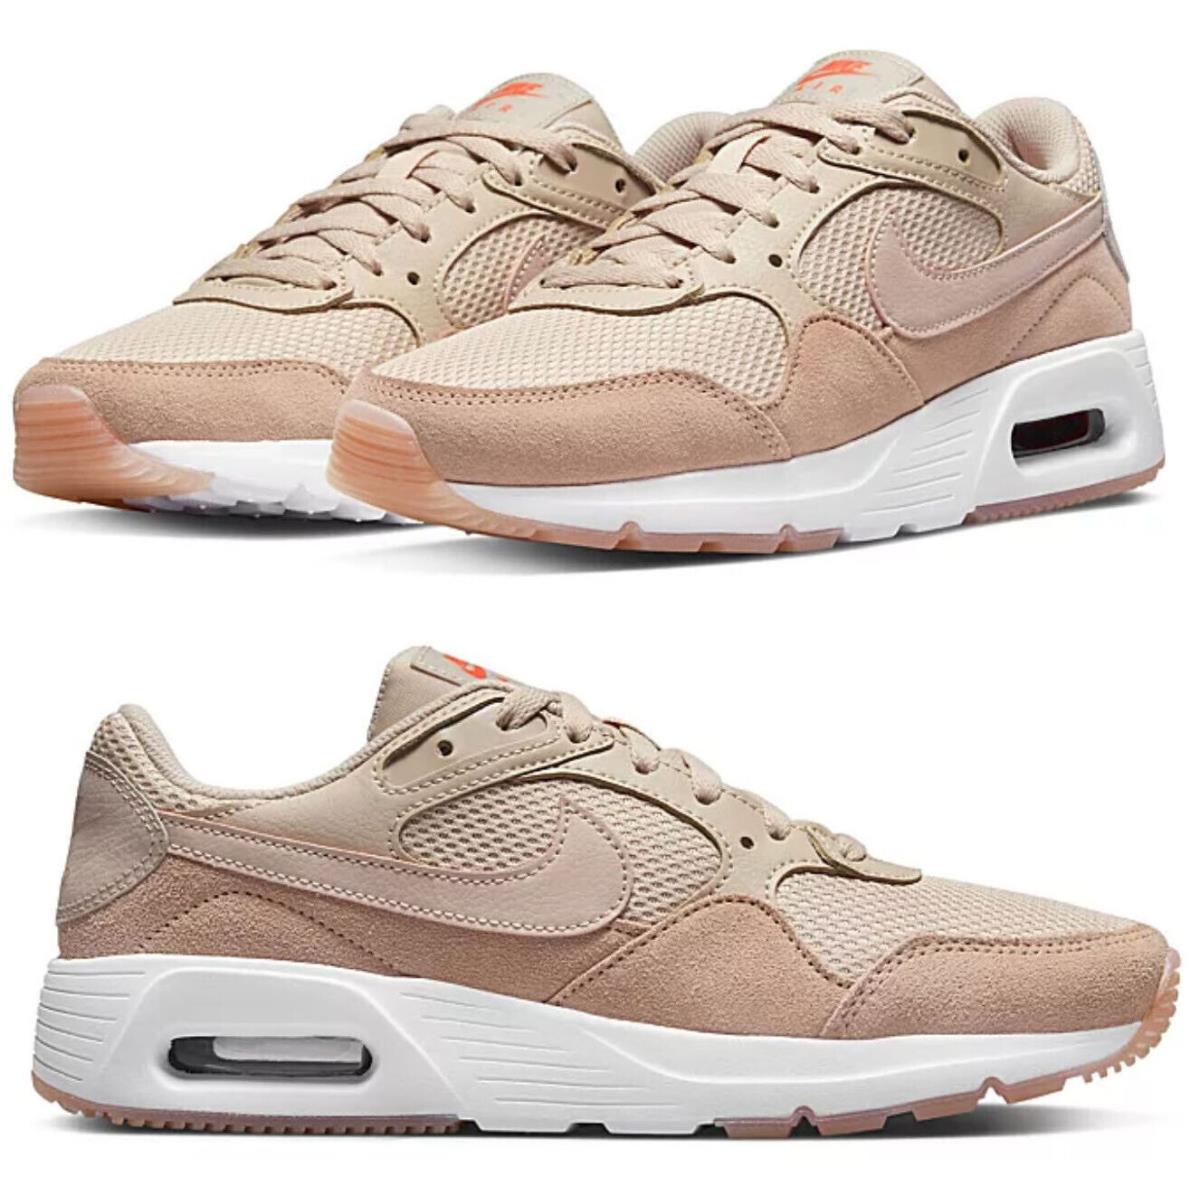 Nike Air Max SC Casual Shoes Gym Women`s Athletic Sneakers Blush Size 7